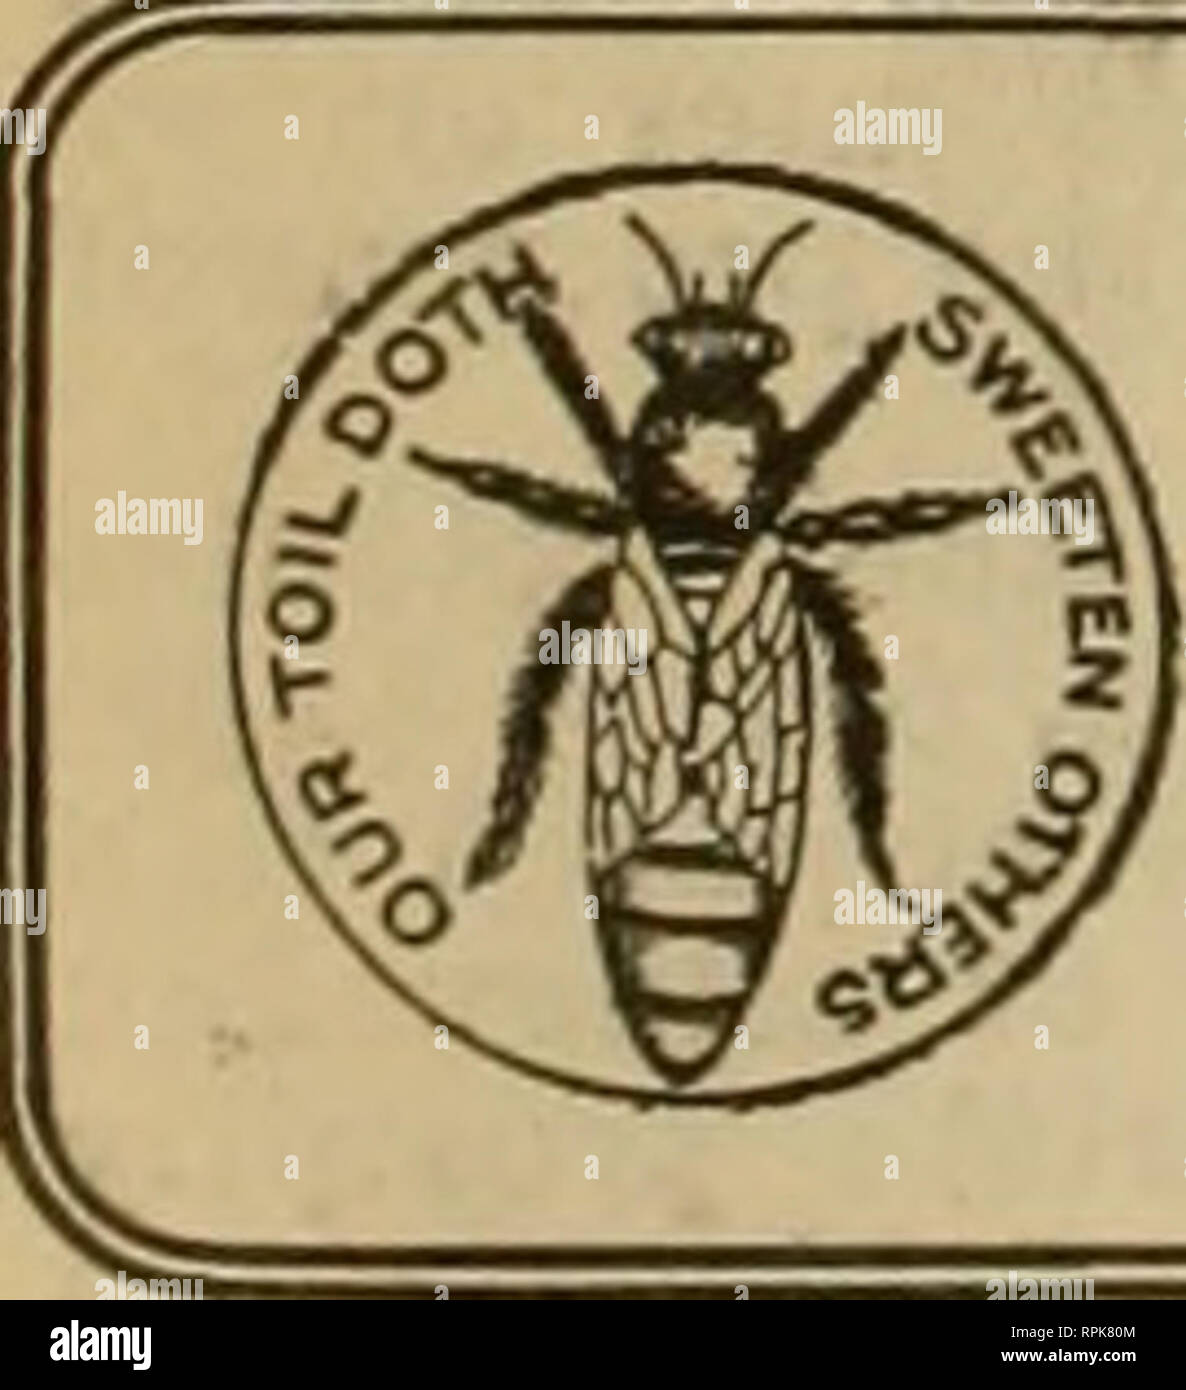 . American bee journal. Bee culture; Bees. 886 THE AMERICAN BEE JOURNAL Dec. 21, 1905 I can't make a living from my 80 home colonies, and I can't add out-lying yards to the plant, for there is no way of visiting them. I'm afraid of breaking my neck in learn- ing to use a bicycle, though in days of yore how I used to ride horses, and skate and dance 1 During those times a broken neck never bothered me ; but when one knows what it would mean to a little, aged mother, I tell you it makes a difference. I've had three horses—two were ruined, and one I sold to keep her from being ruined, and when sh Stock Photo